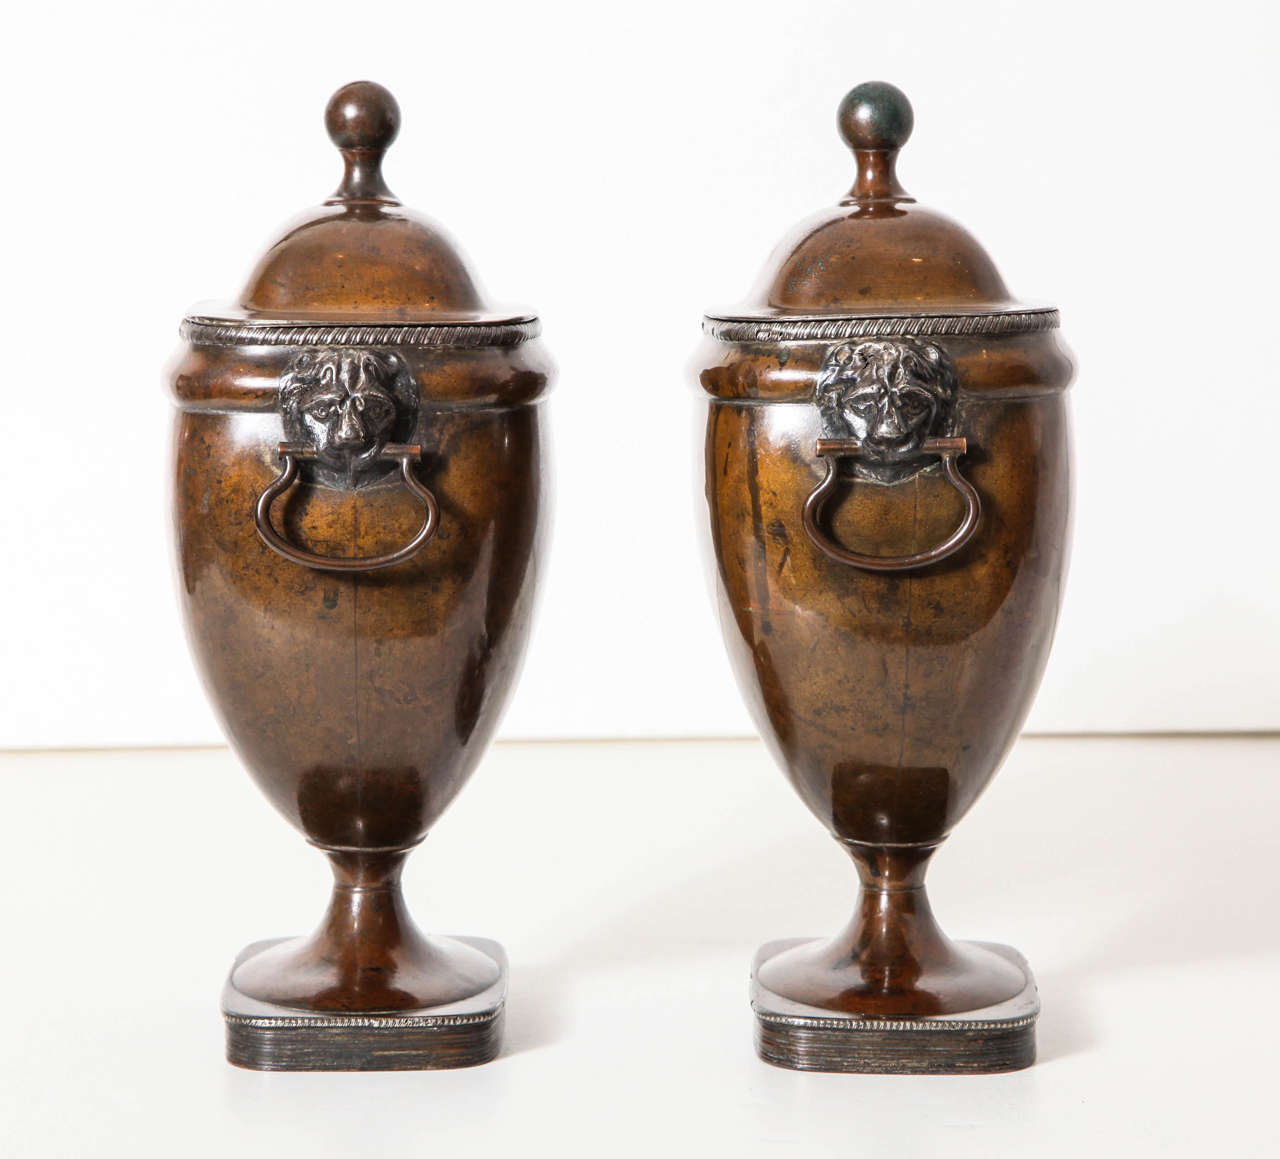 Silver Plate A Pair of 19th century English silvered copper covered urns